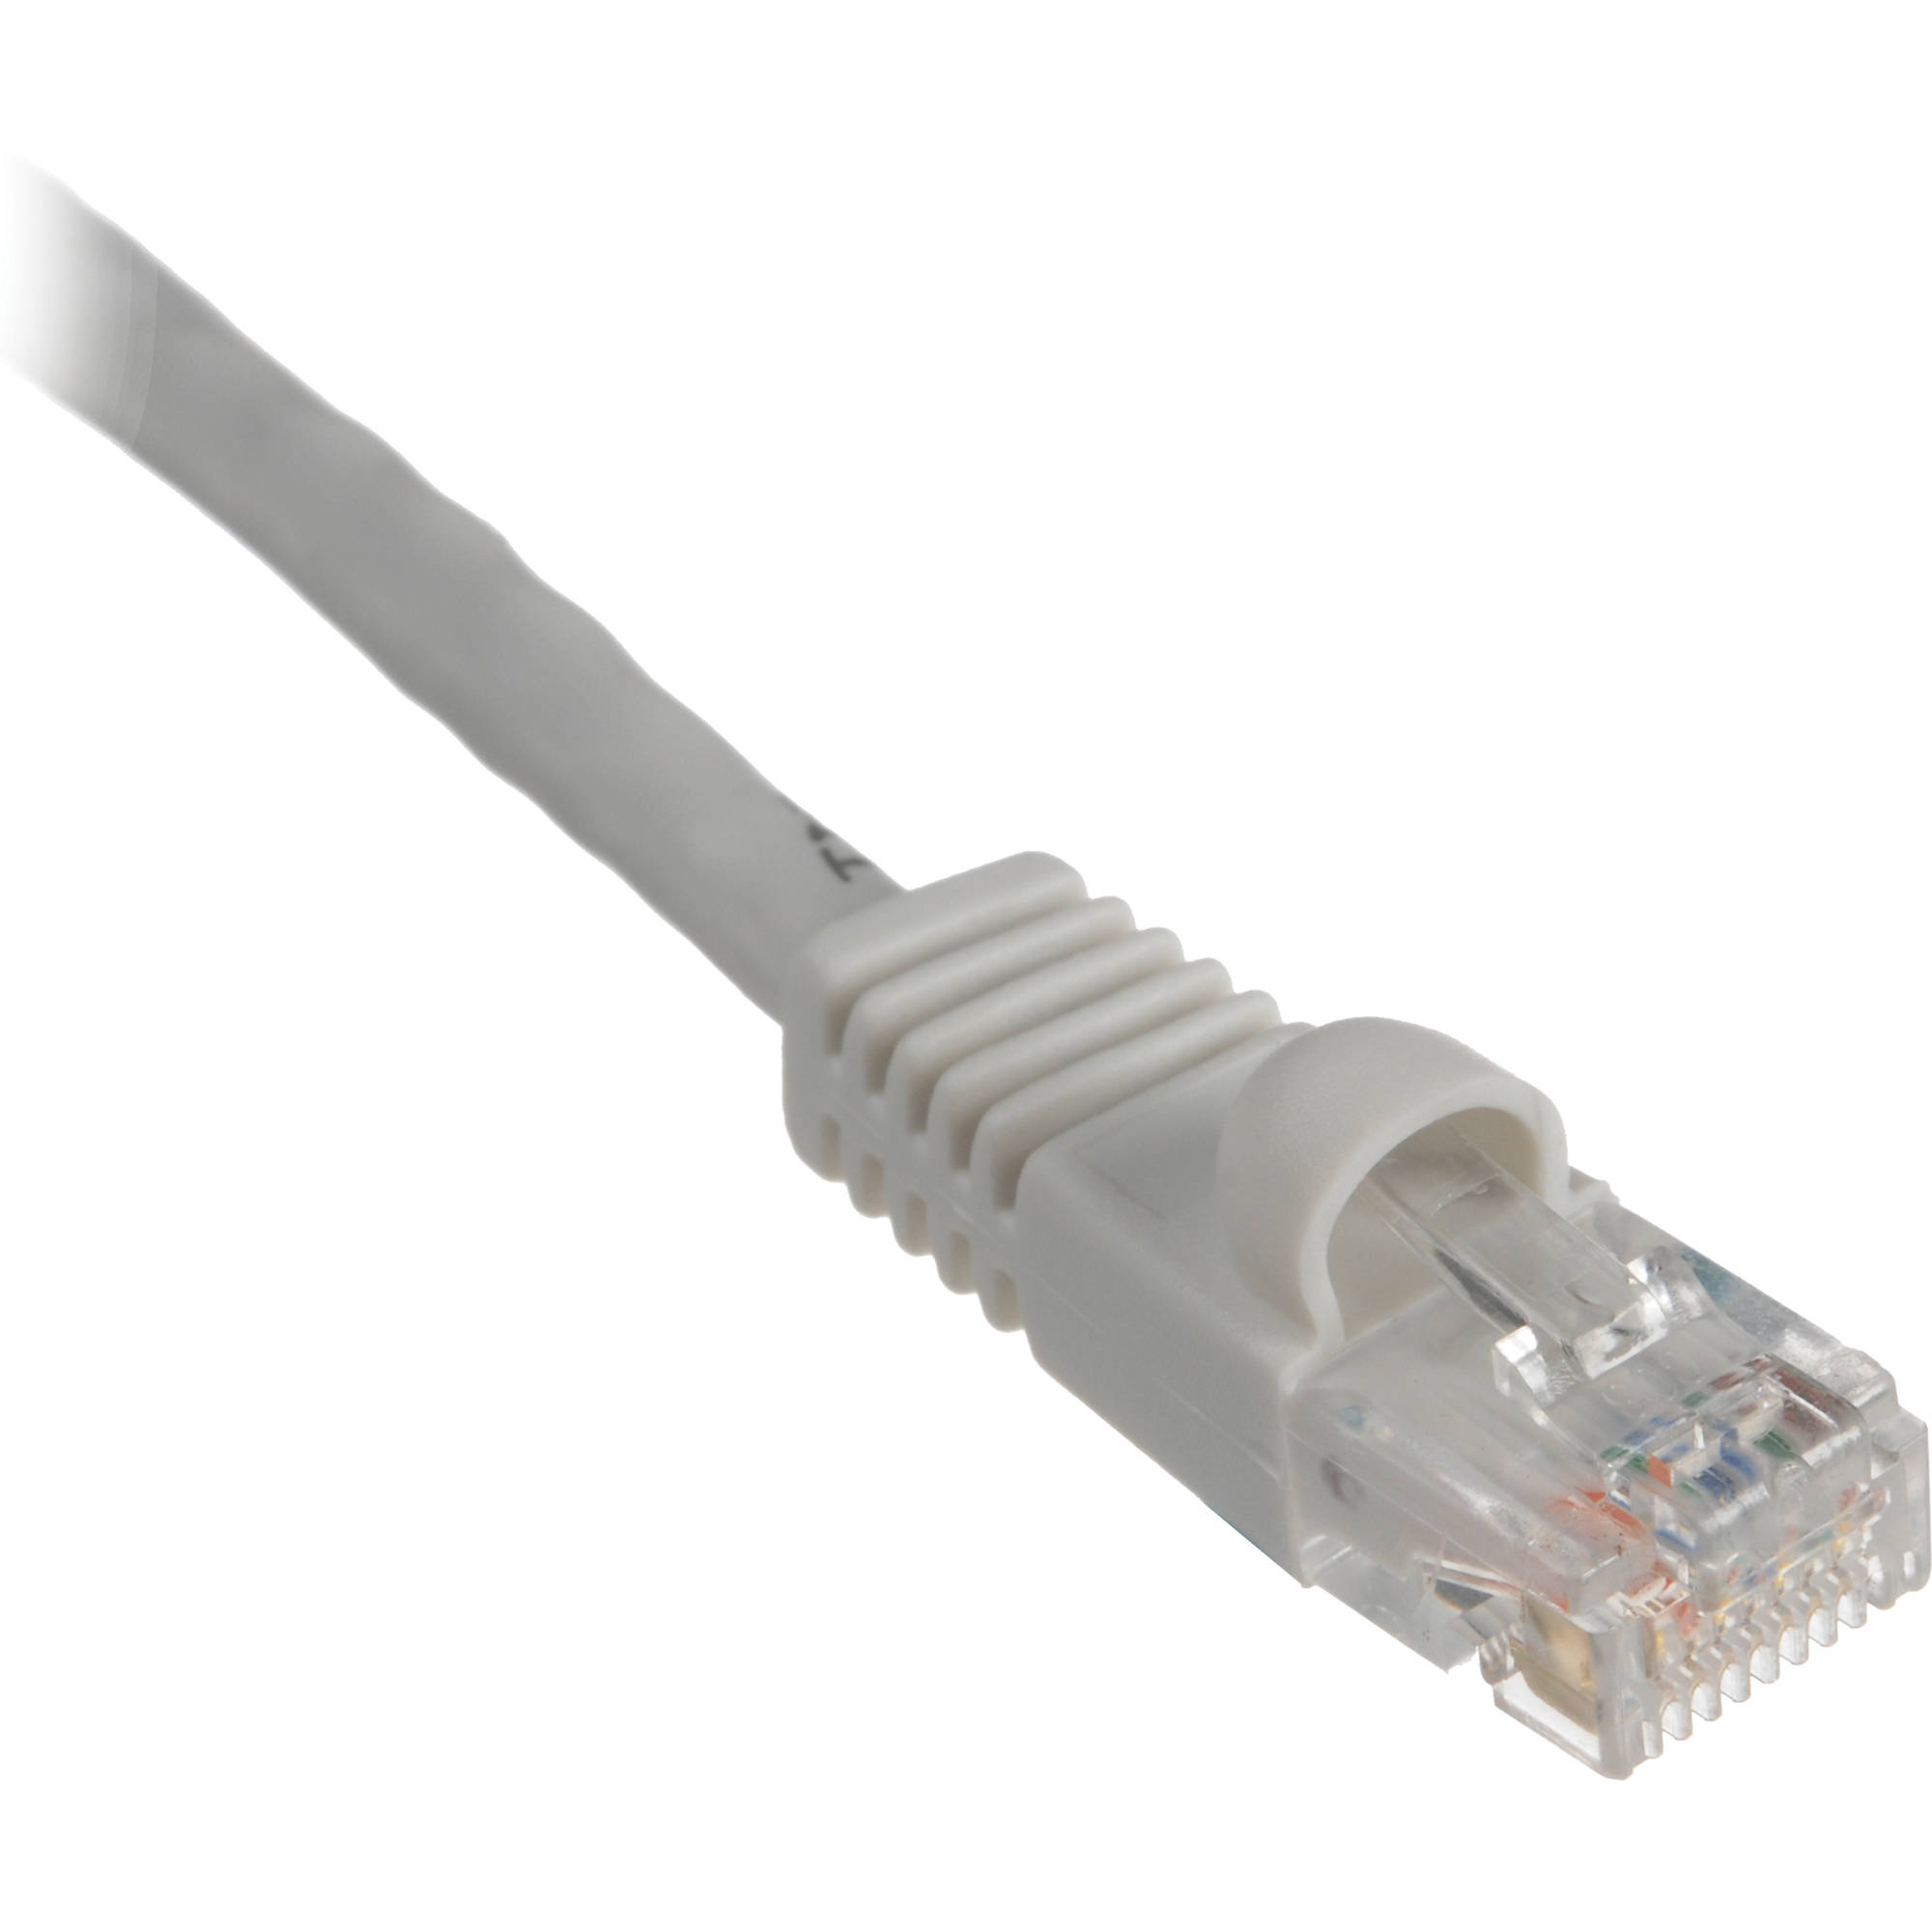 Comprehensive Cat5e 350 MHz Snagless Patch Cable (100', White)